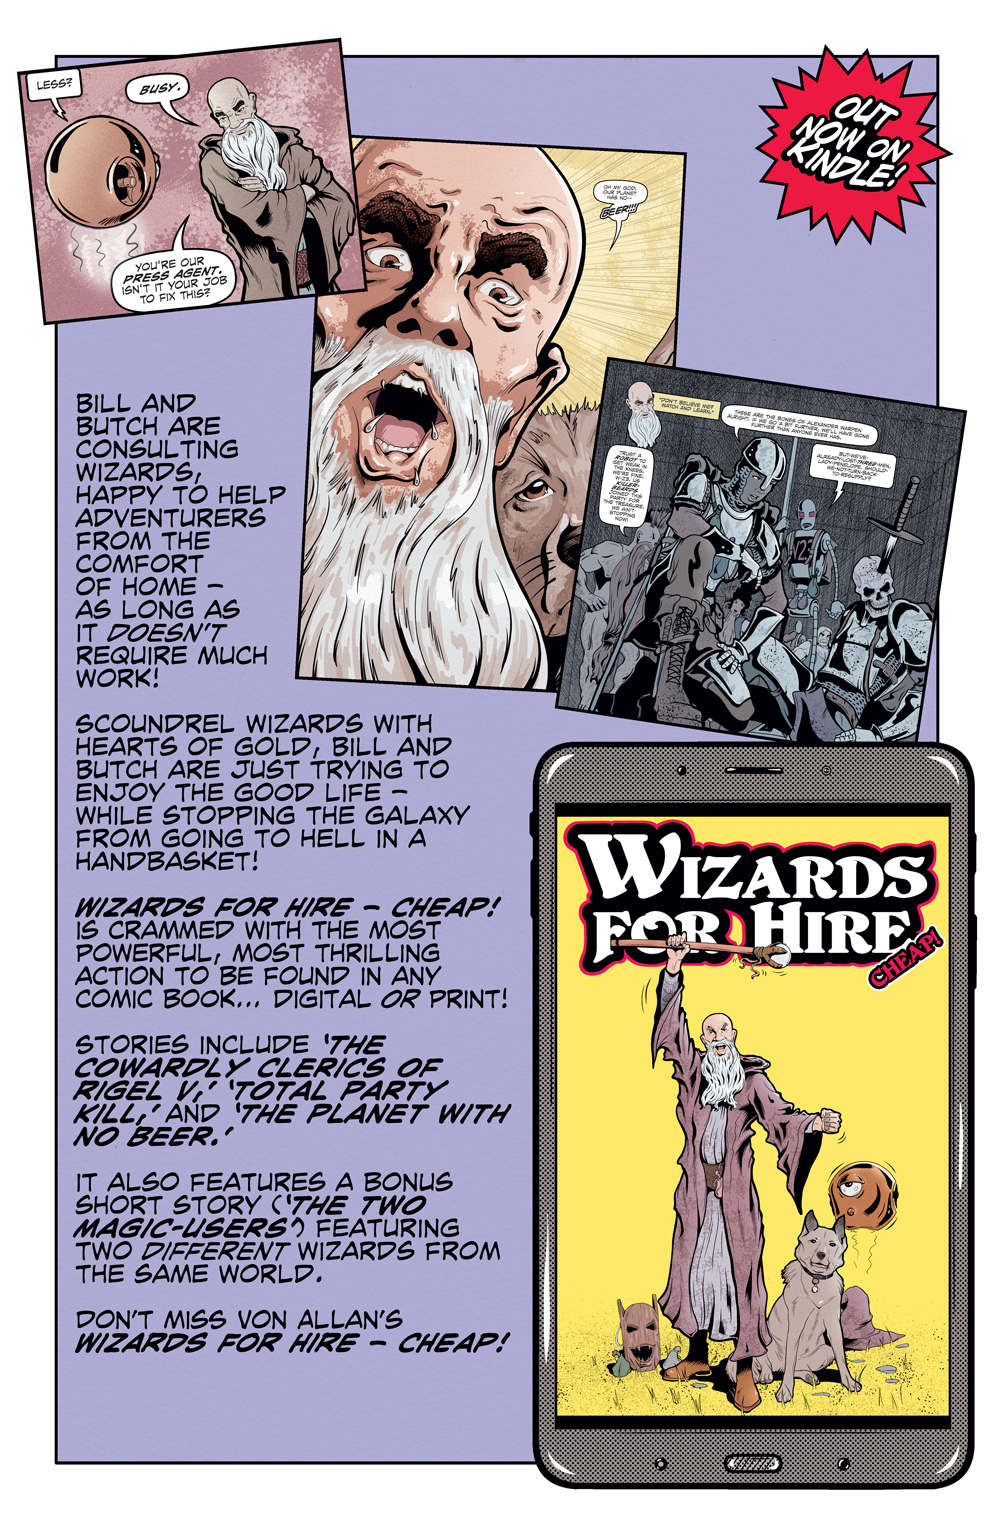 Teaser image for Wizards for Hire - Cheap! written and illustrated by Von Allan